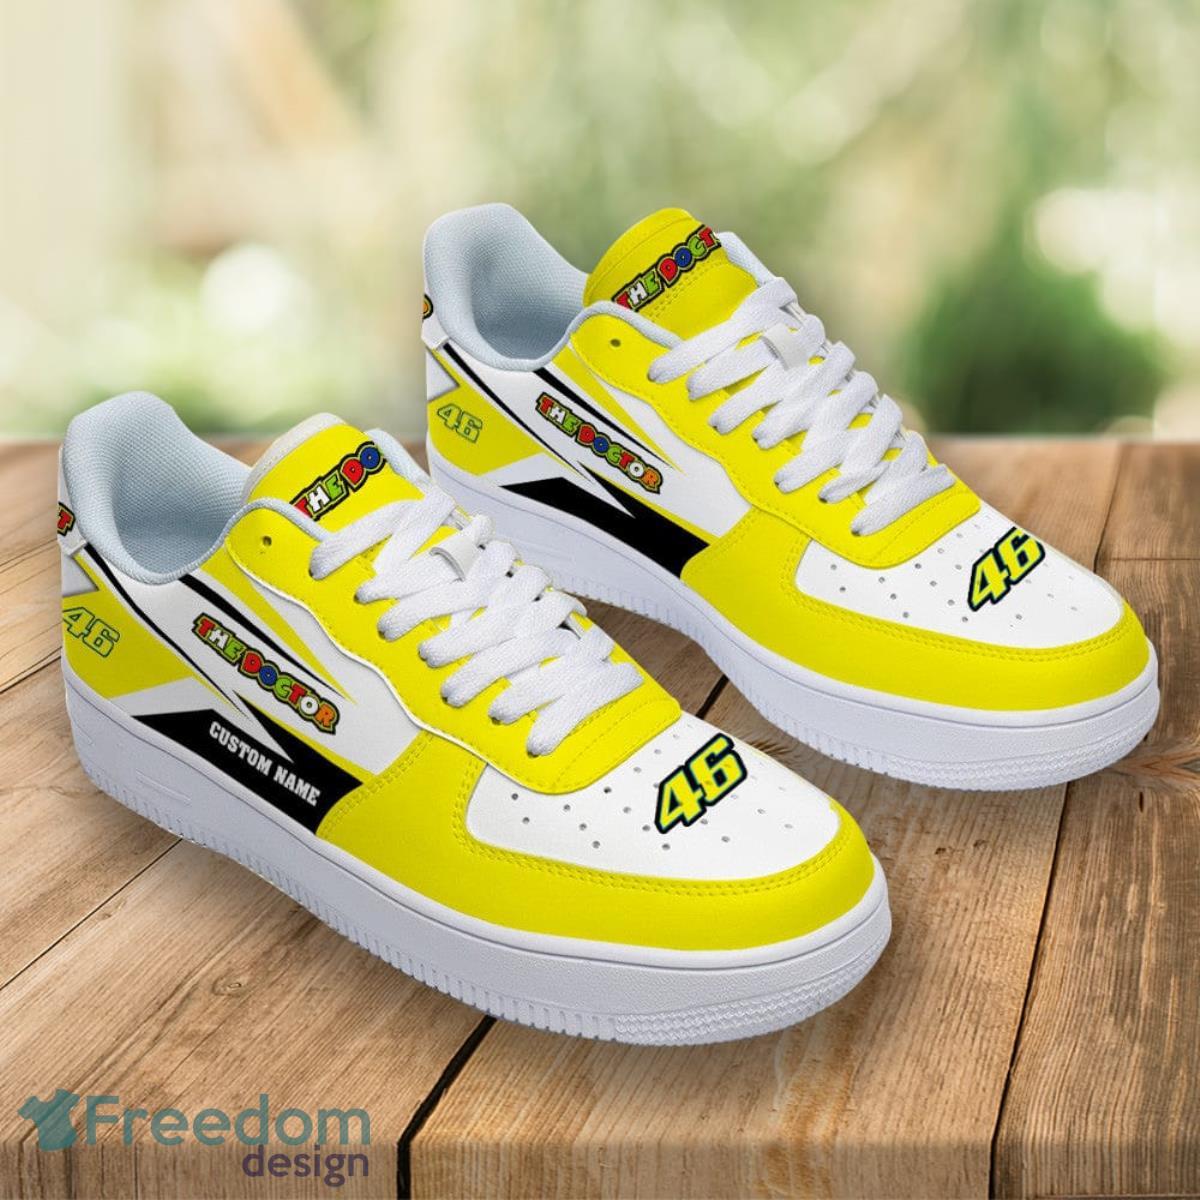 46 The Doctor Valentino Rossi Custom Name Air Force Shoes Sport Sneakers For Men Women Product Photo 2